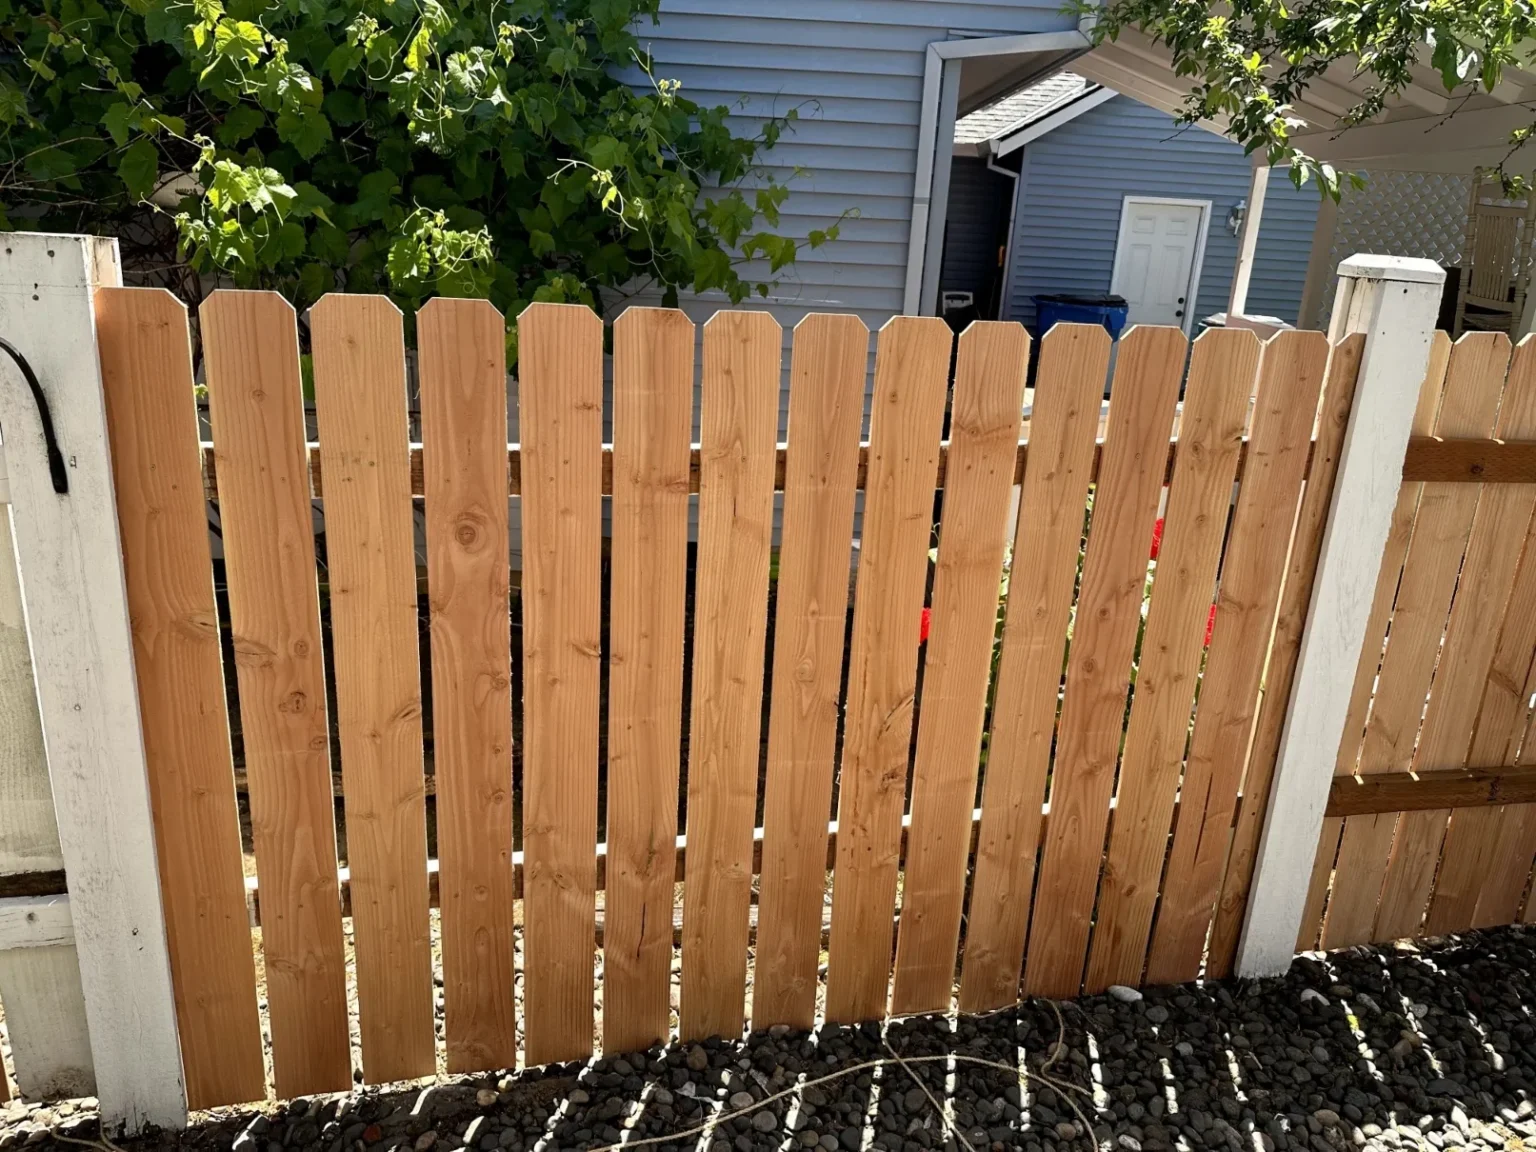 Replaced a sagging old fence with new post, cedar planks and railing by PaintitrightPro